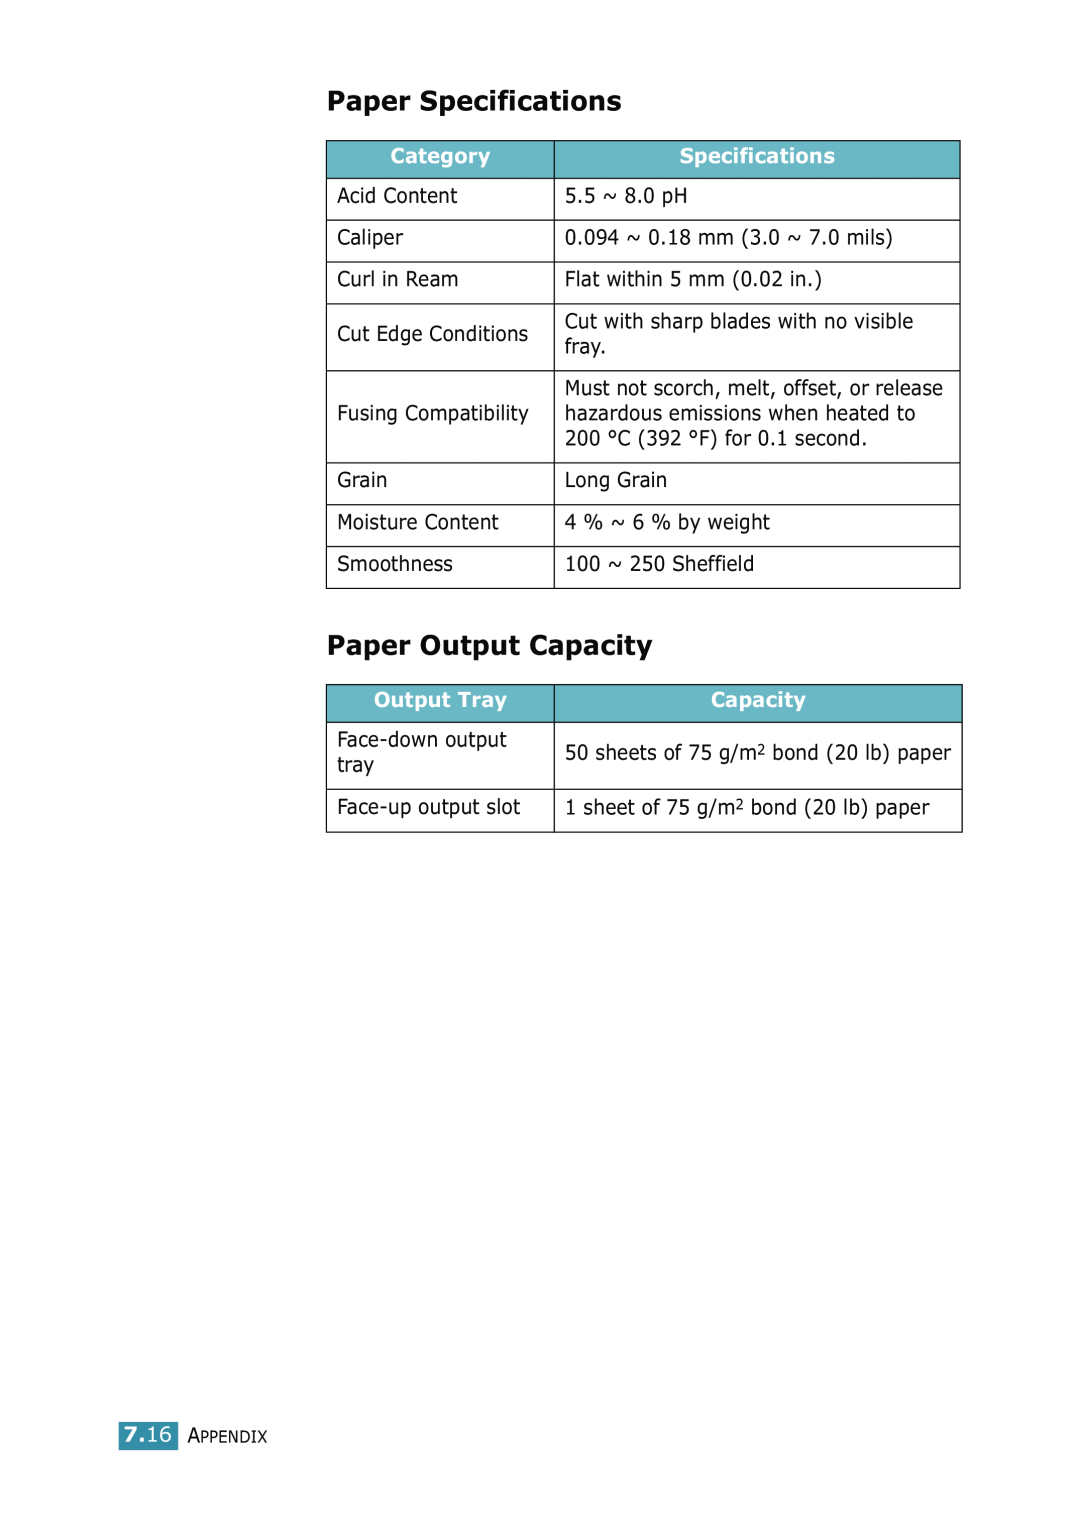 Samsung ML-1520 manual Paper Specifications, Paper Output Capacity, Category, Output Tray 